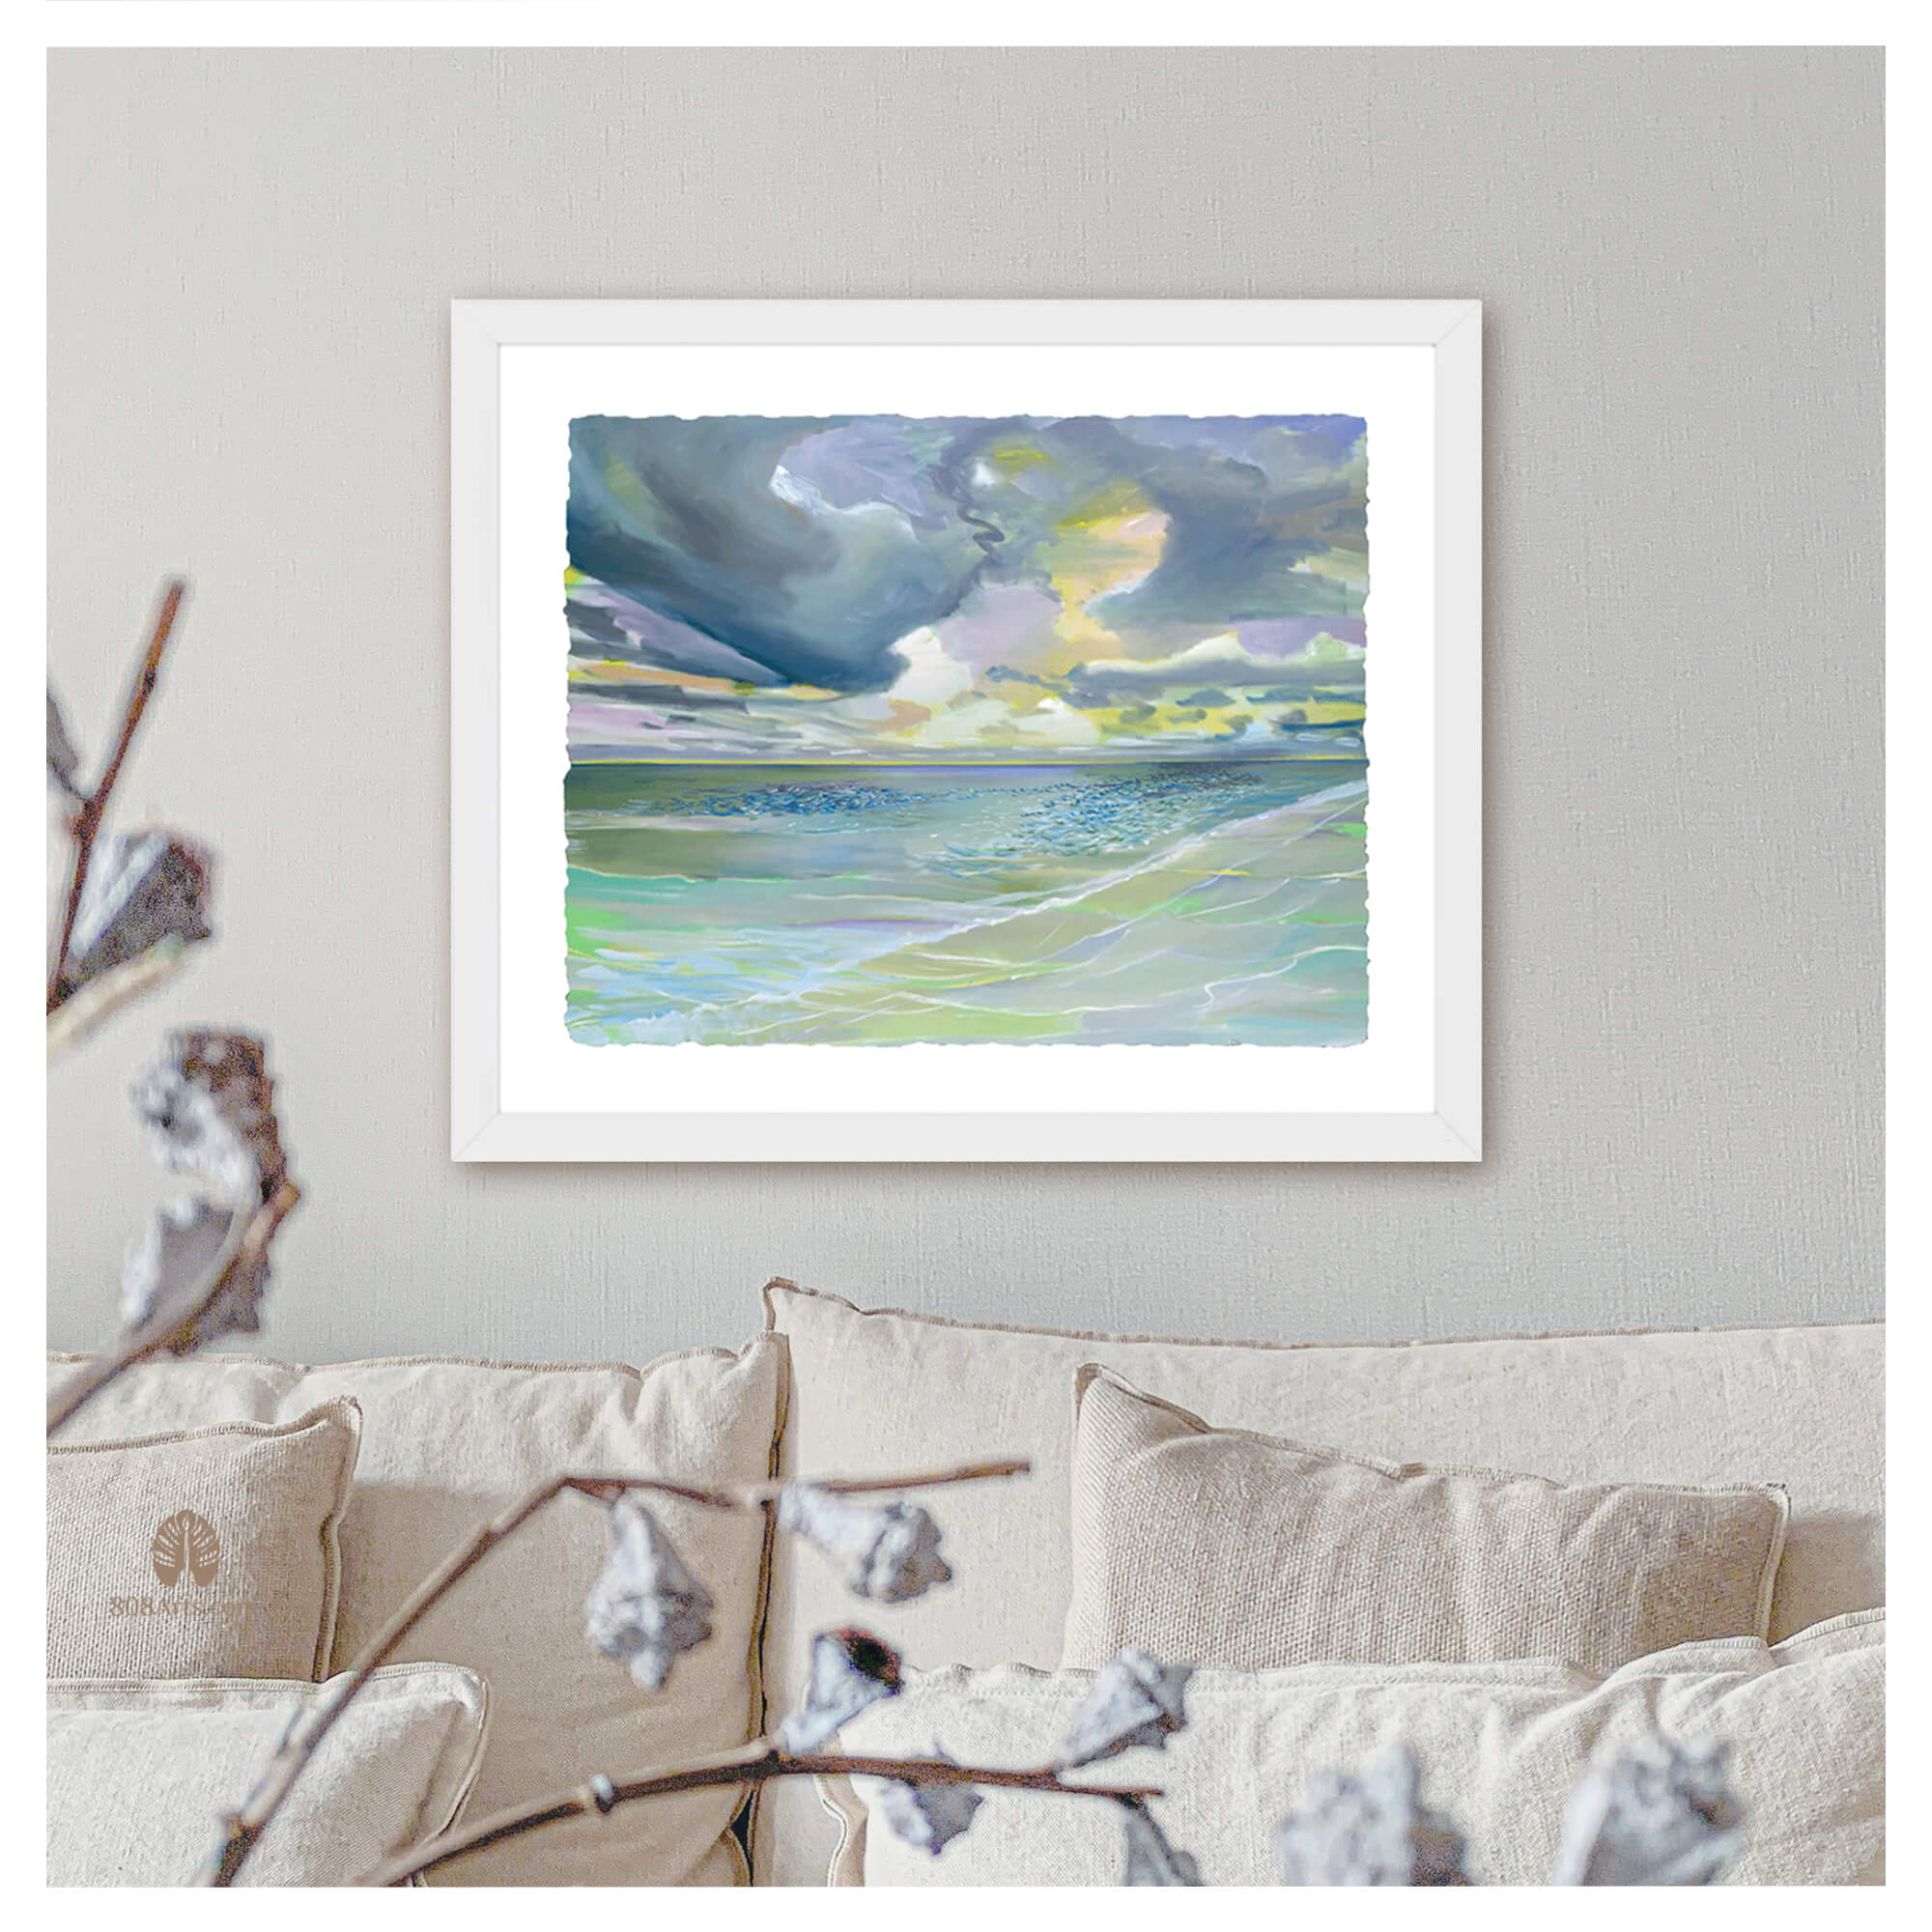 Framed paper art print of a serene seascape with the water reflecting yellow, green, blue, and teal hues by Hawaii artist Saumolia Puapuaga